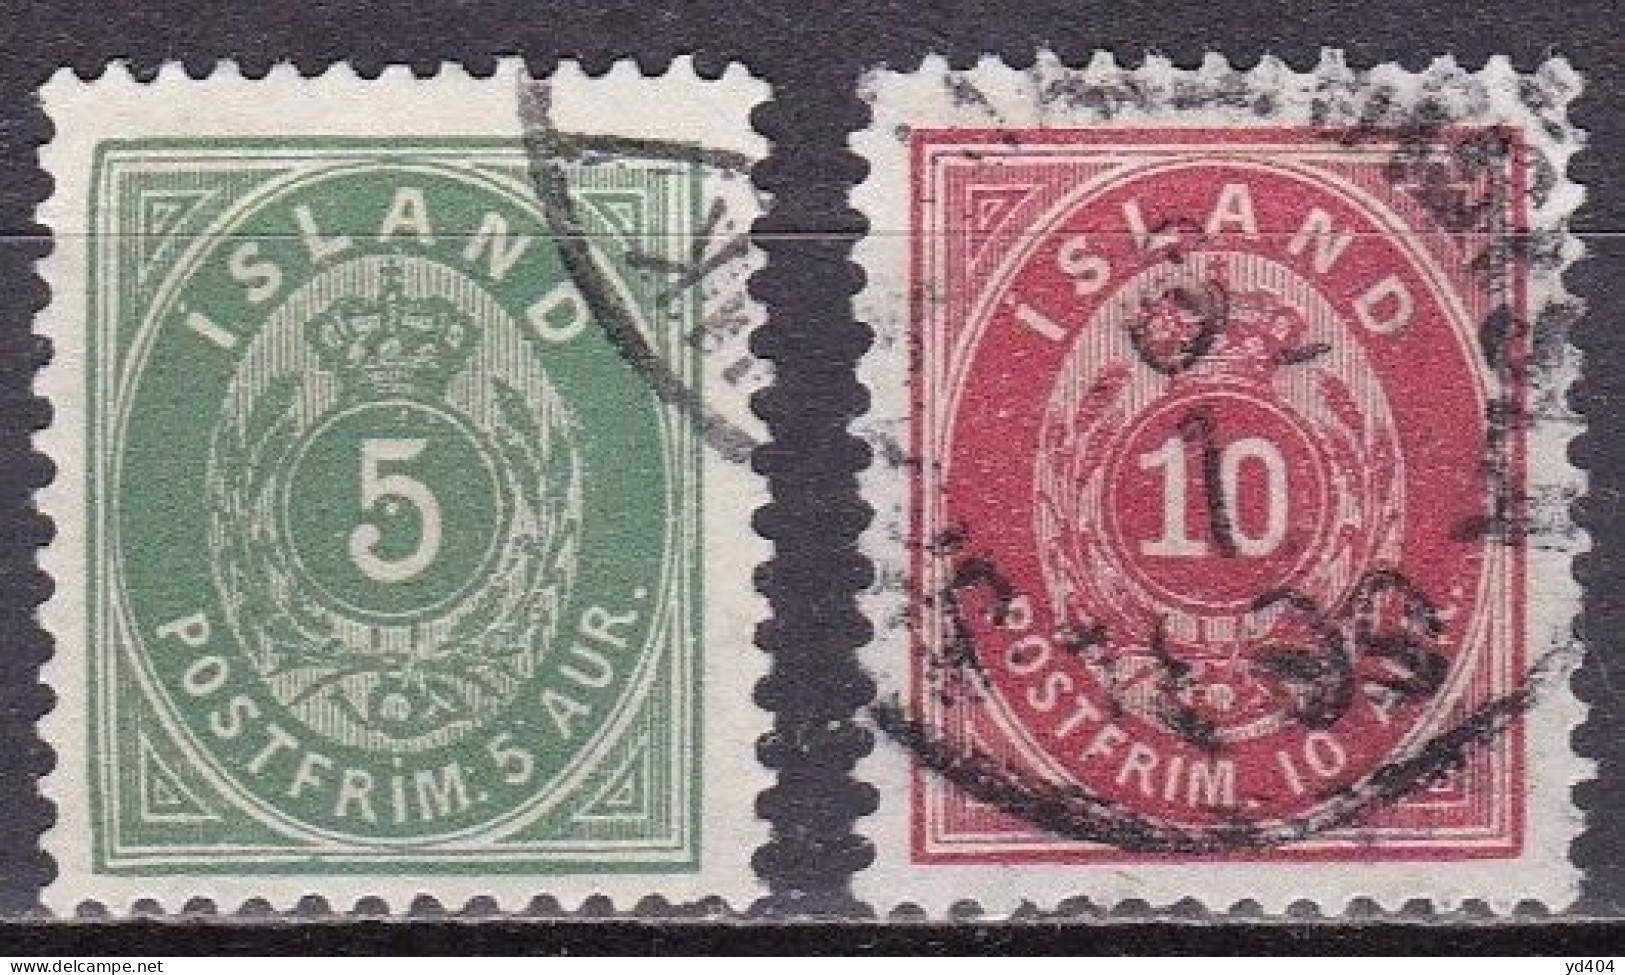 IS003E – ISLANDE – ICELAND – 1897 – NUMERAL VALUE IN AUR - PERF. 12,5 – SG # 28-30 USED 6,50 € - Used Stamps